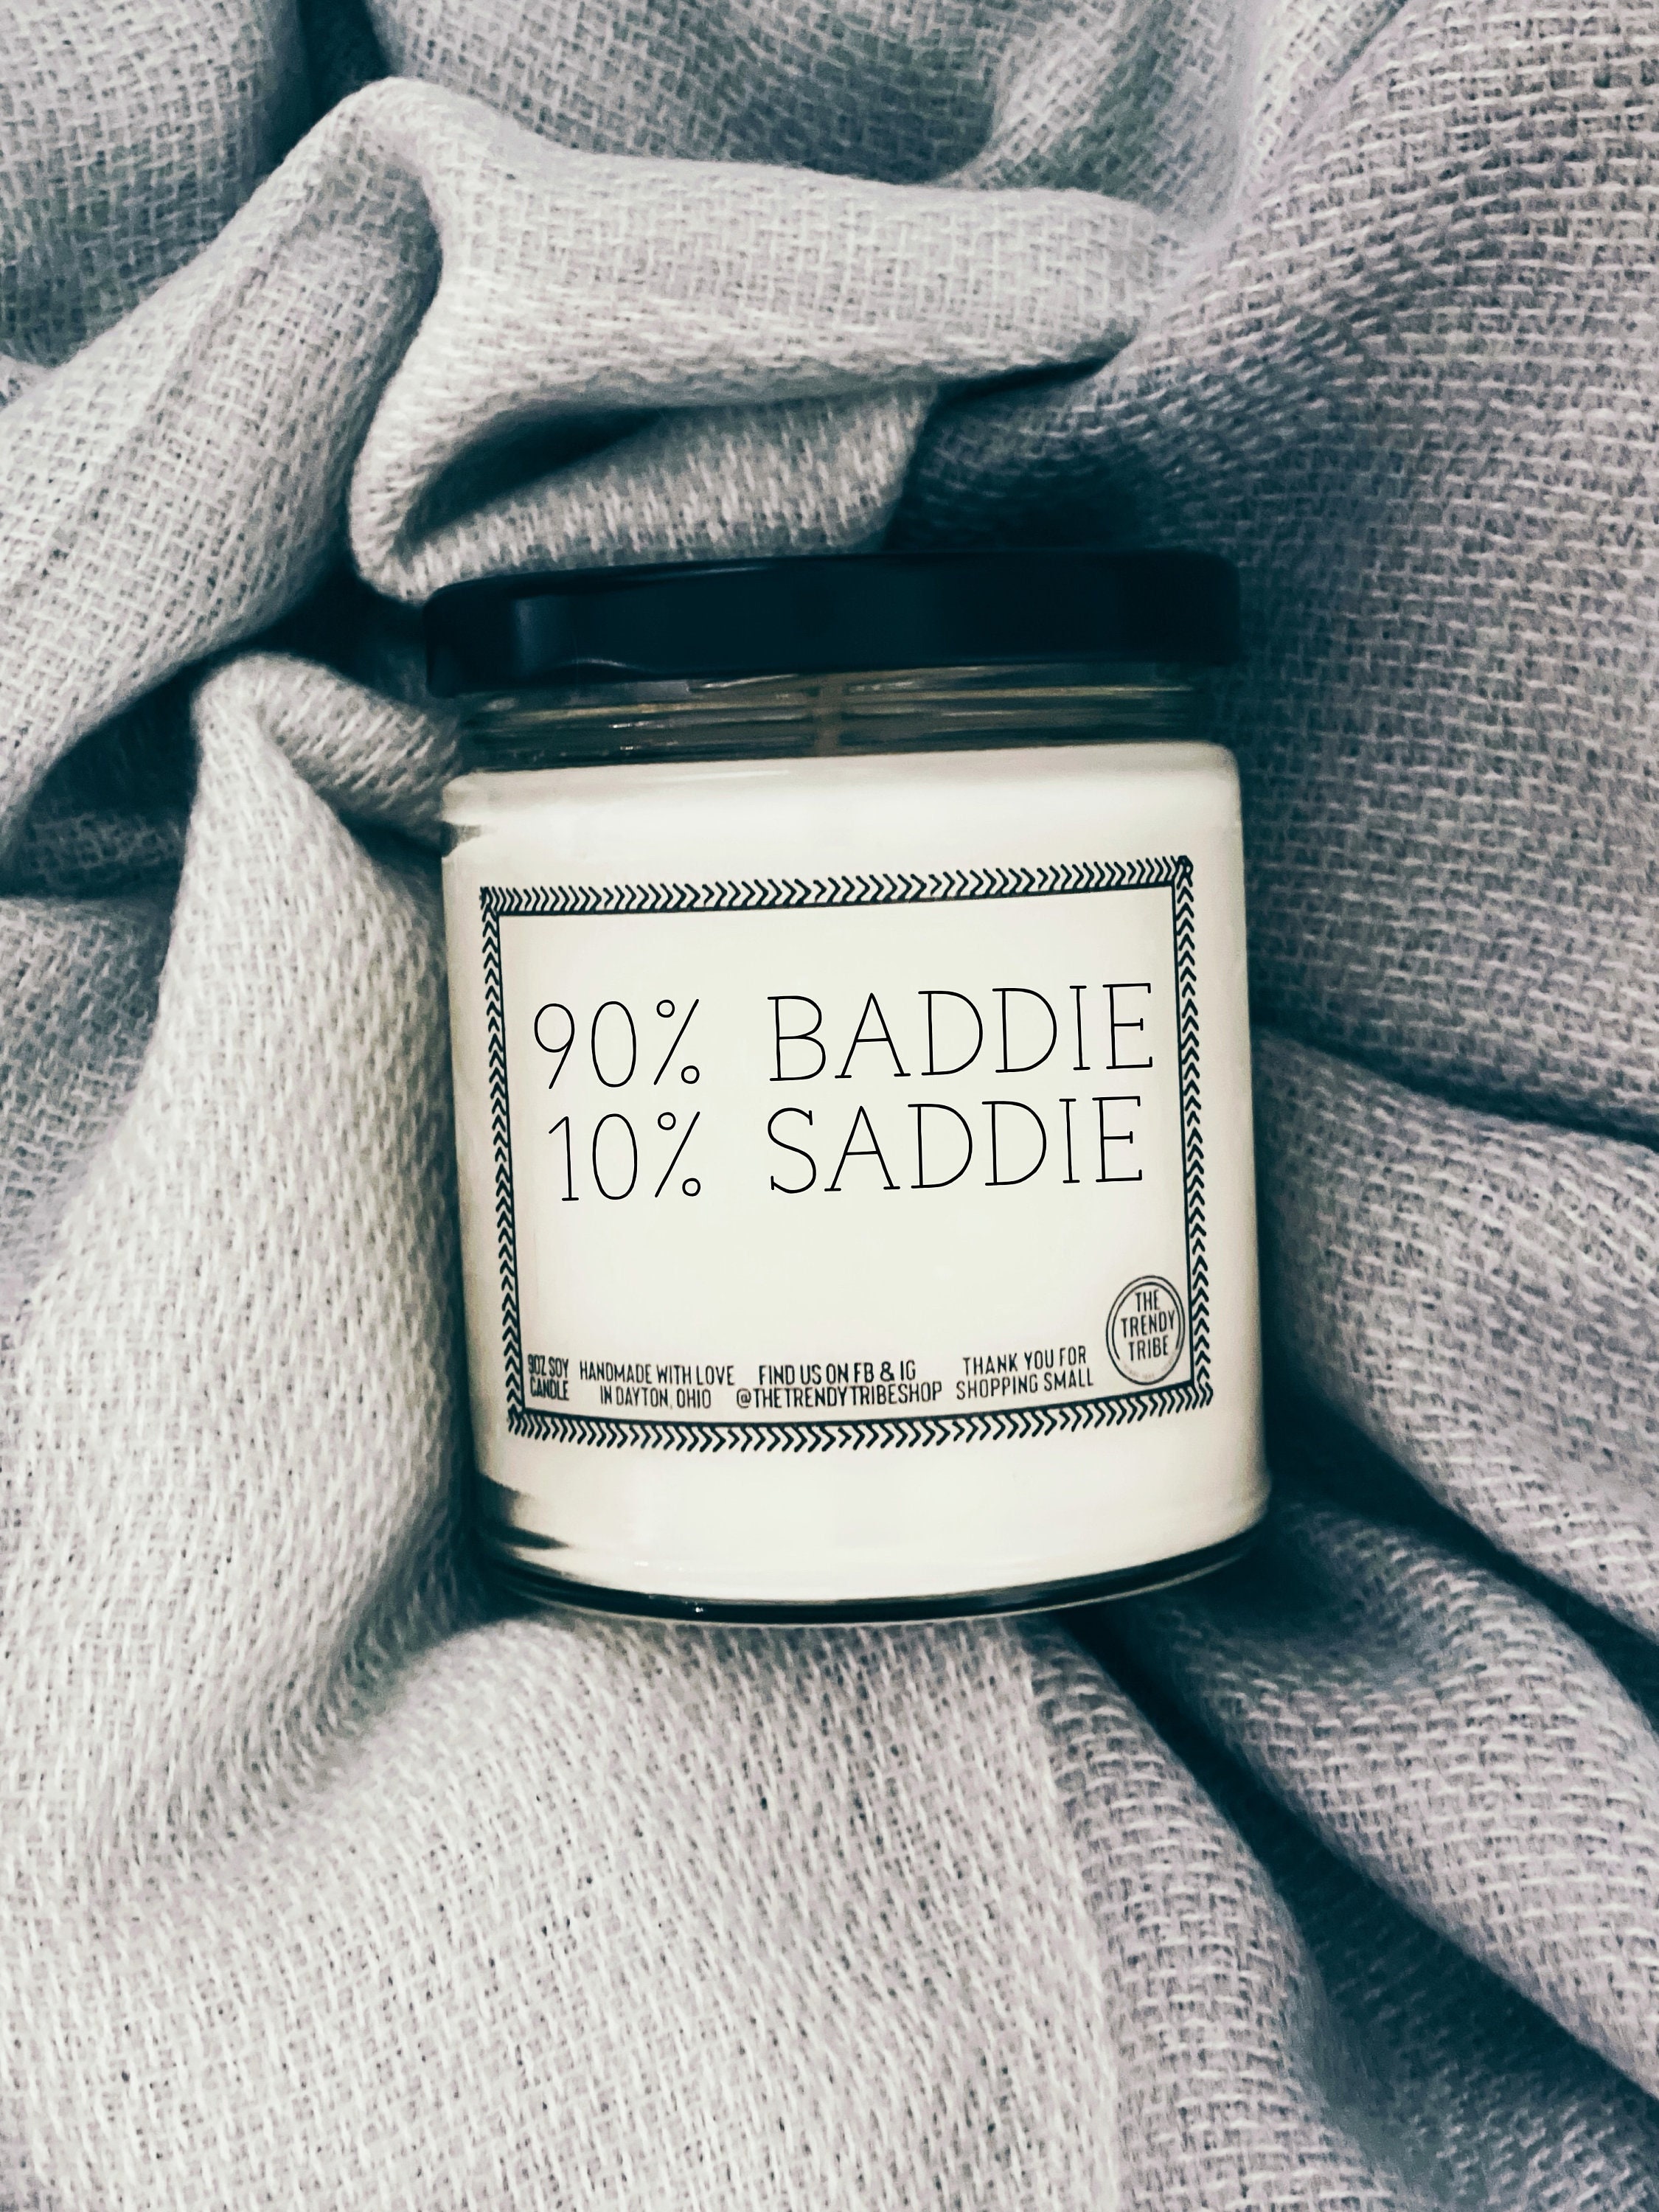 90% Baddie 10 Saddie Candle Funny Candle Funny Gift for Friend picture